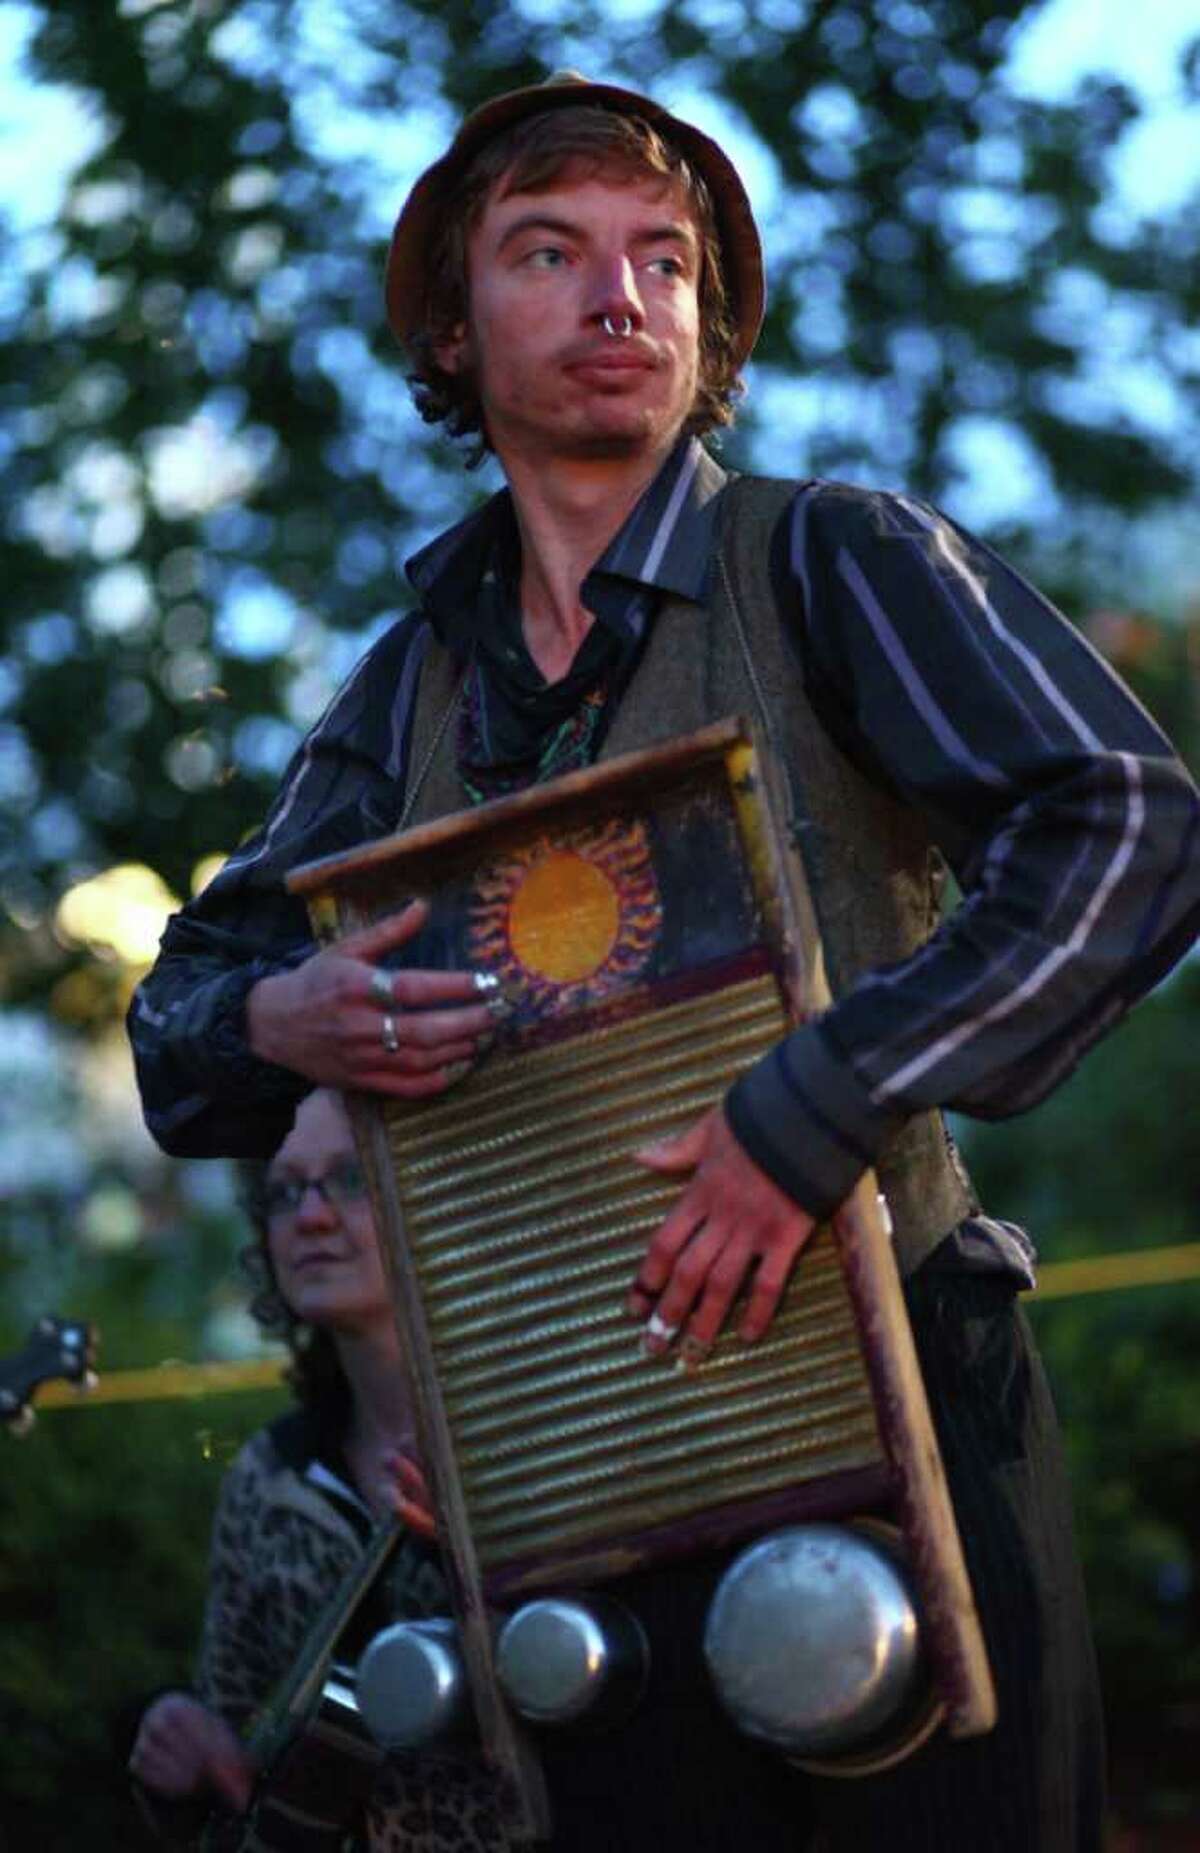 Po, of the band Same Old Use To Be's, plays a washboard and cans during the 40th annual Northwest Folklife Festival. Members of his band have been regular buskers at the festival for many years.